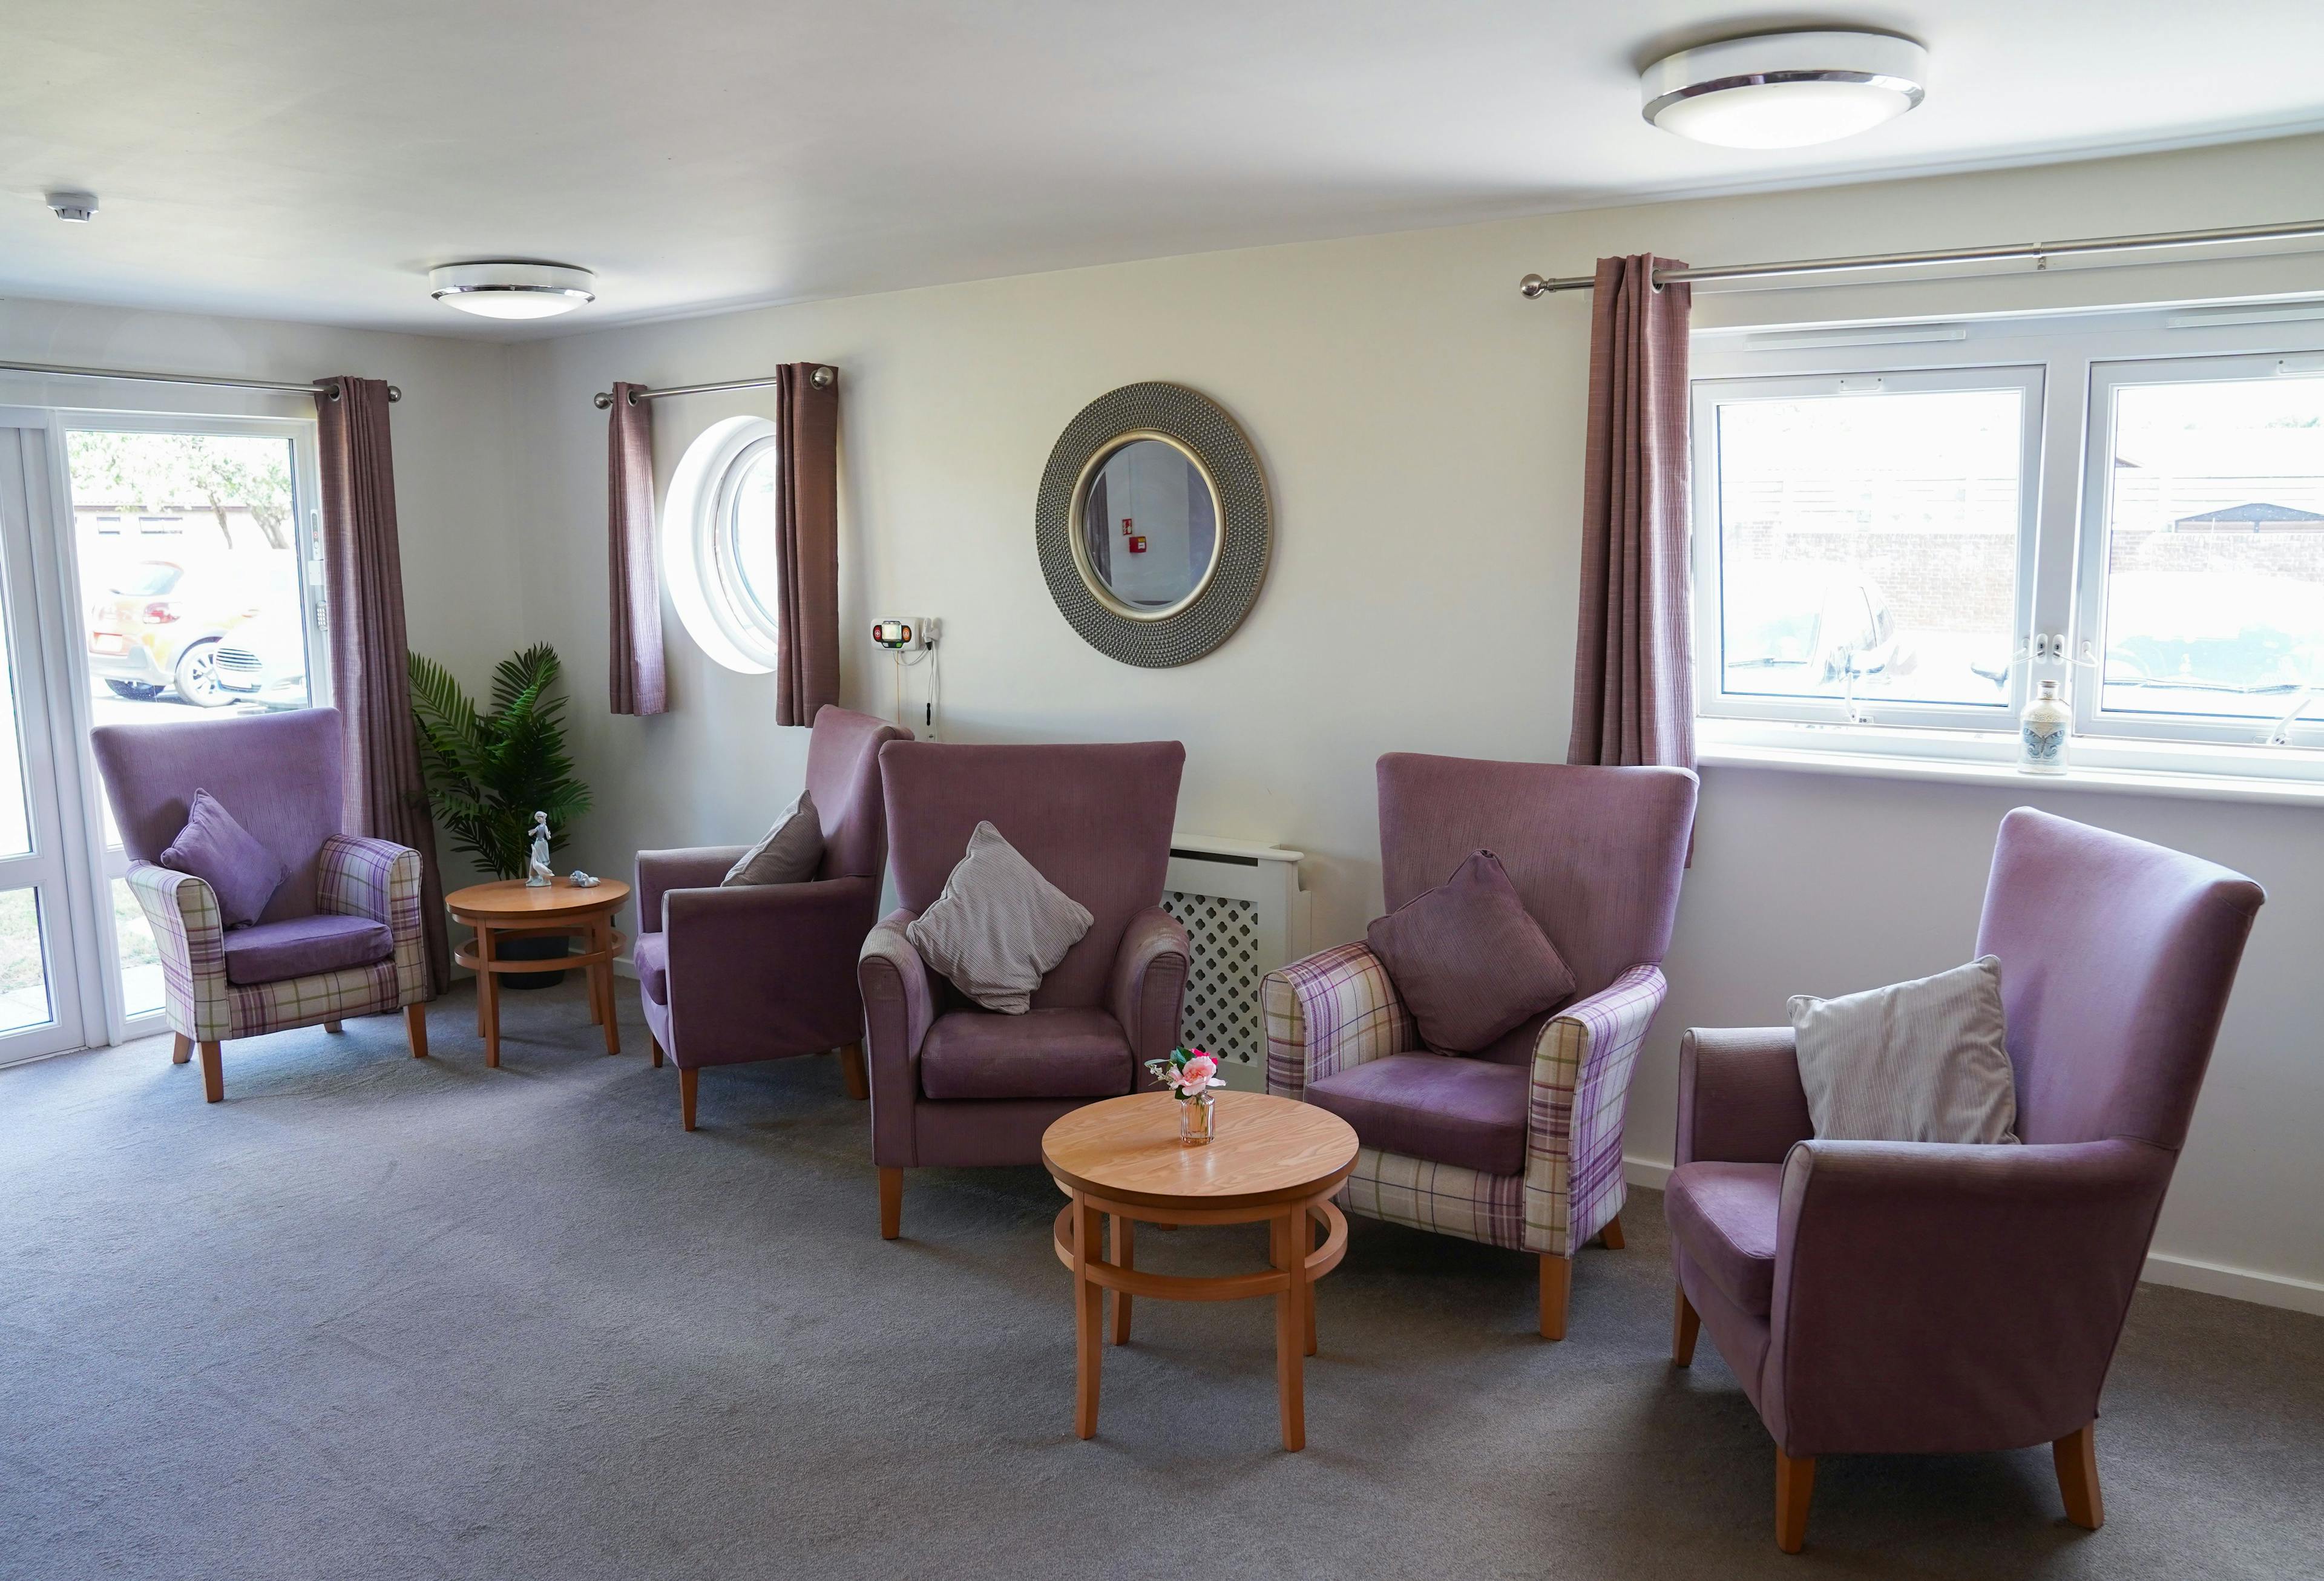 Communal Area at Don Thomas House Care Home in Harwich, Essex